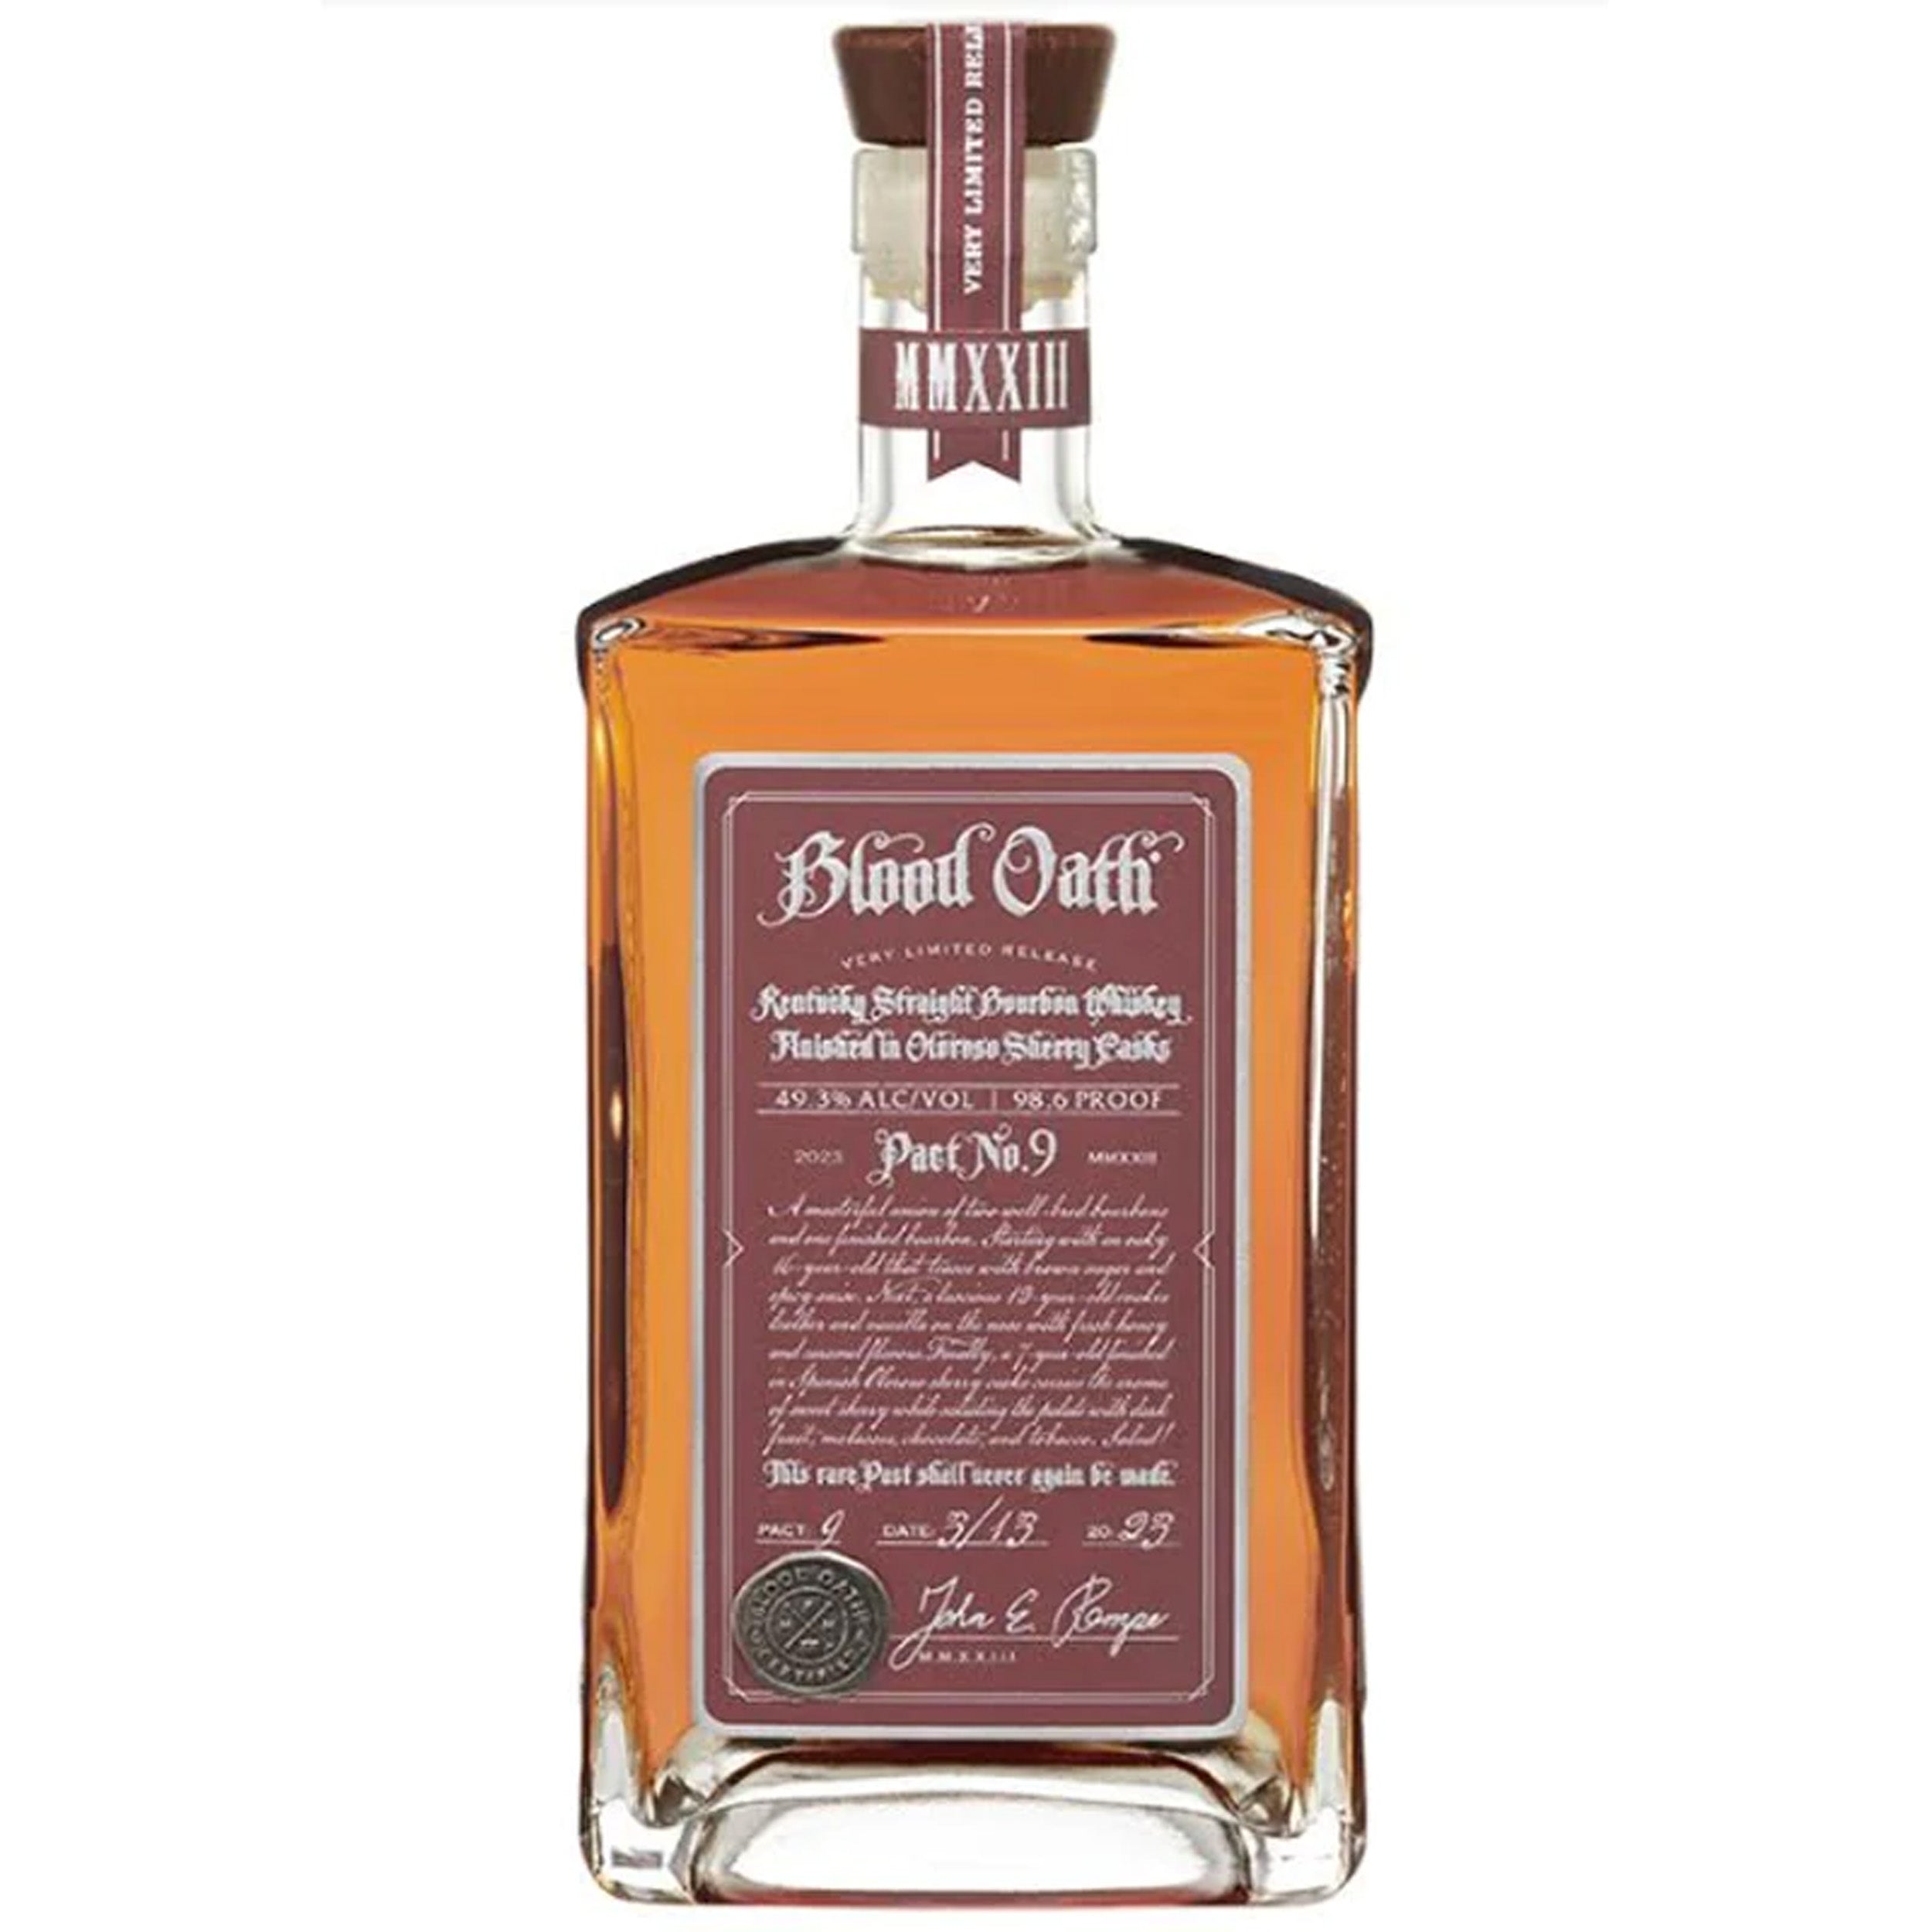 Blood Oath Pact No. 9 Bourbon Whiskey Finished in Oloroso Sherry Casks